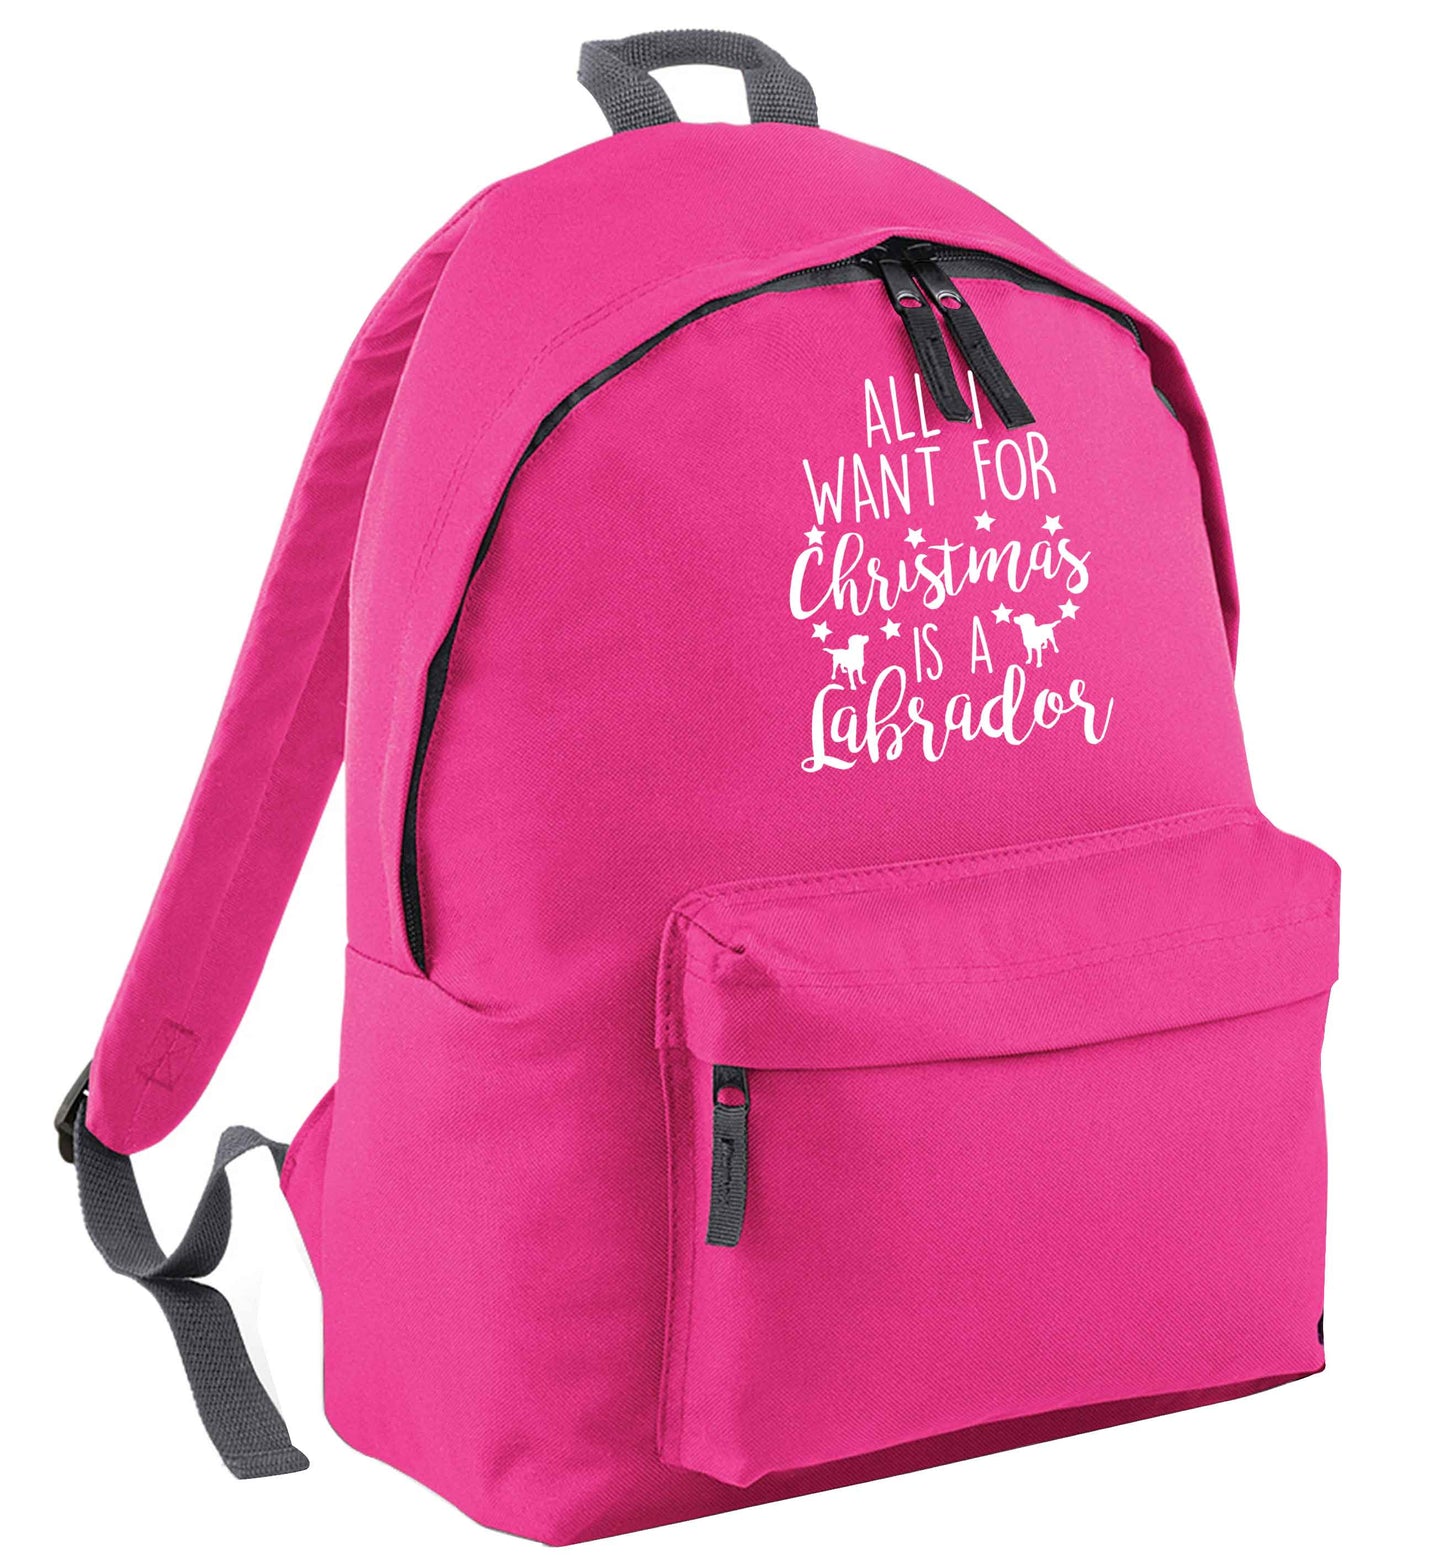 All I want for Christmas is a labrador pink adults backpack